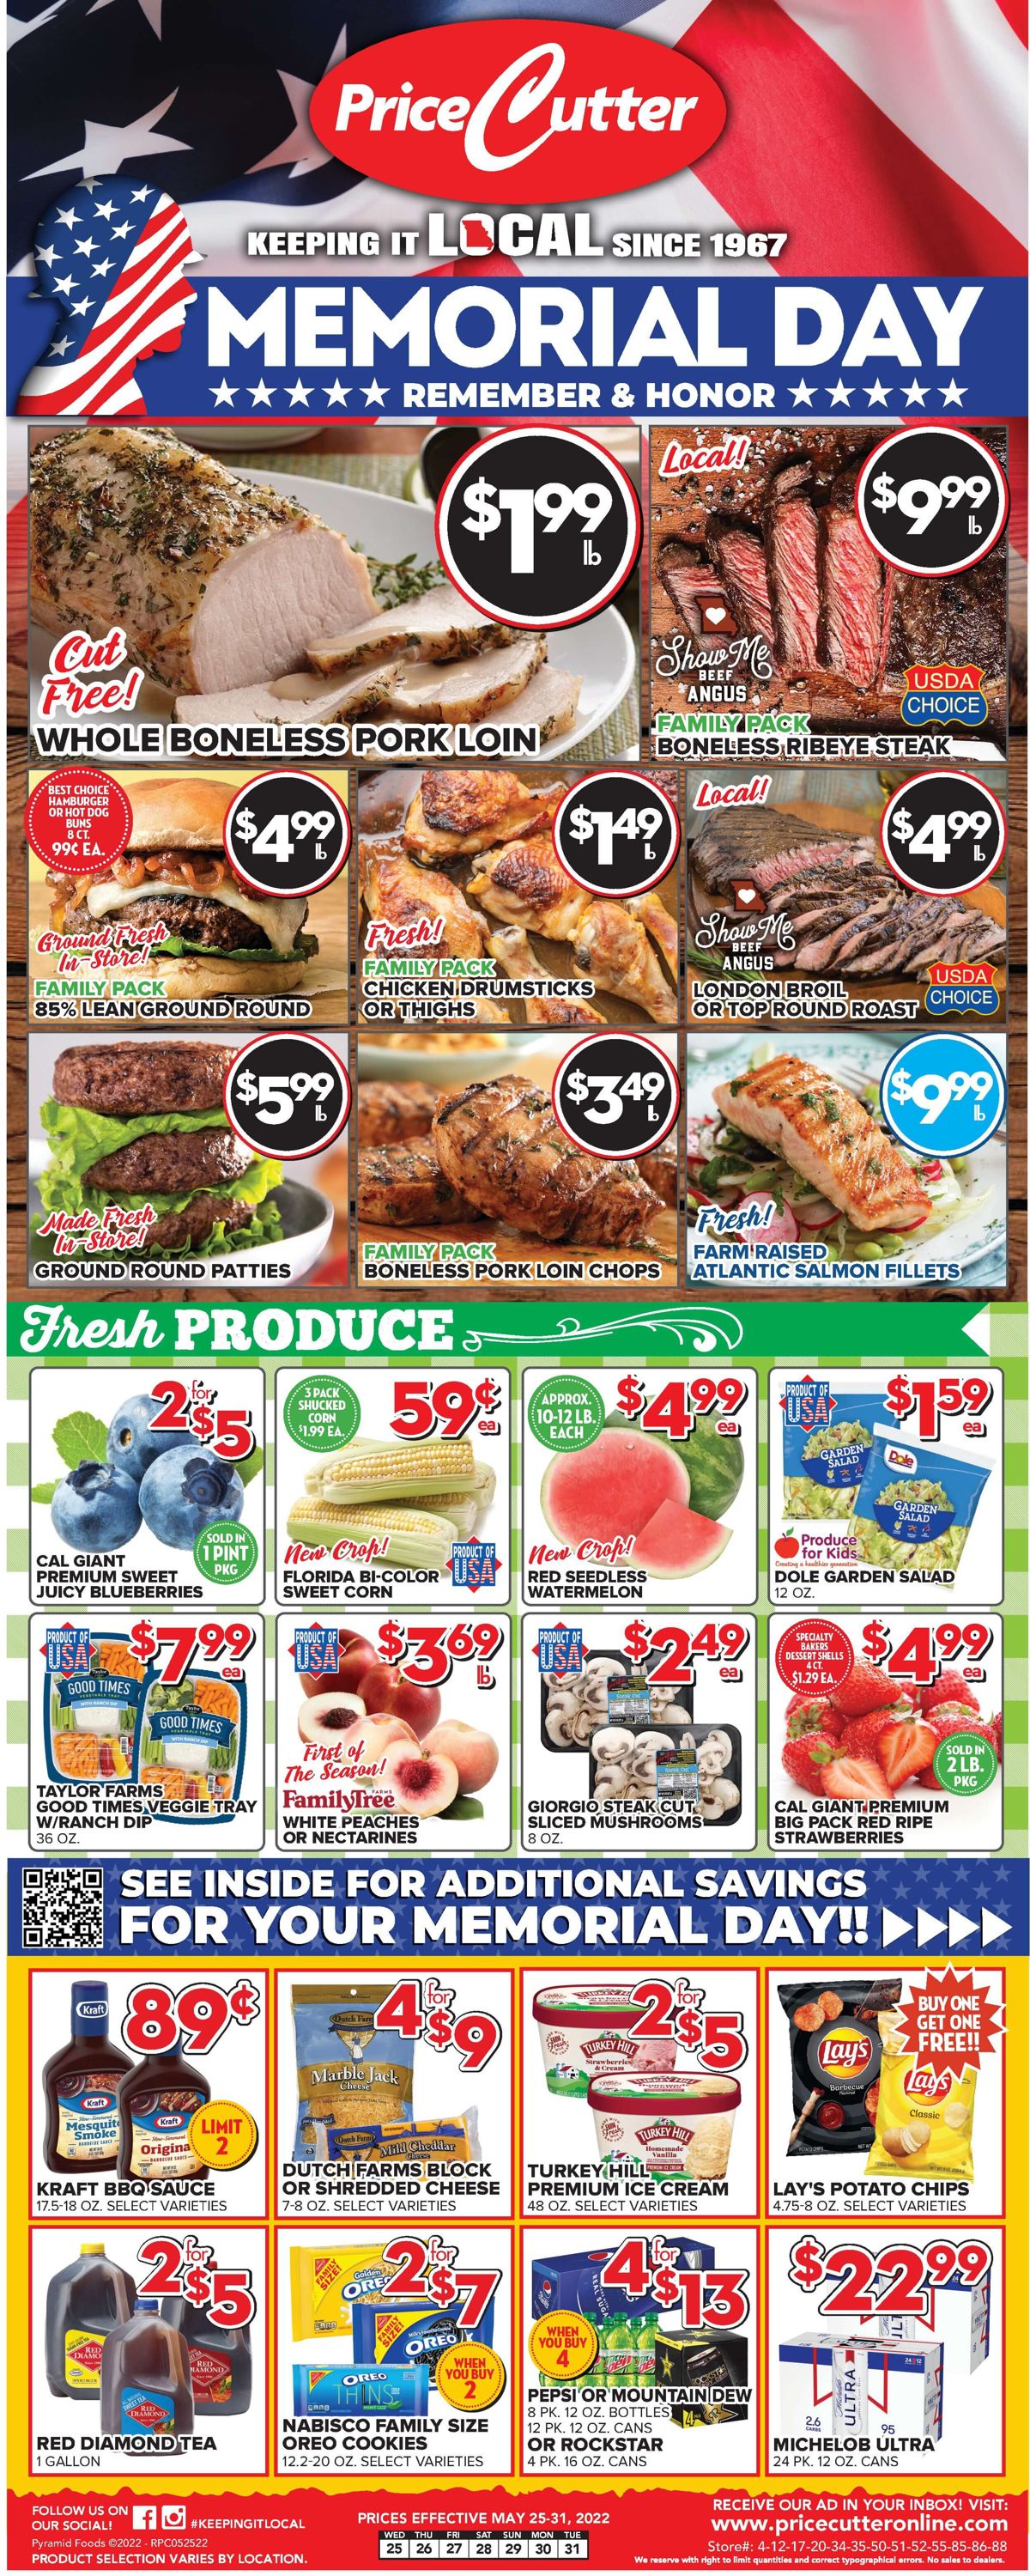 Price Cutter Weekly Ad Circular - valid 05/25-05/31/2022